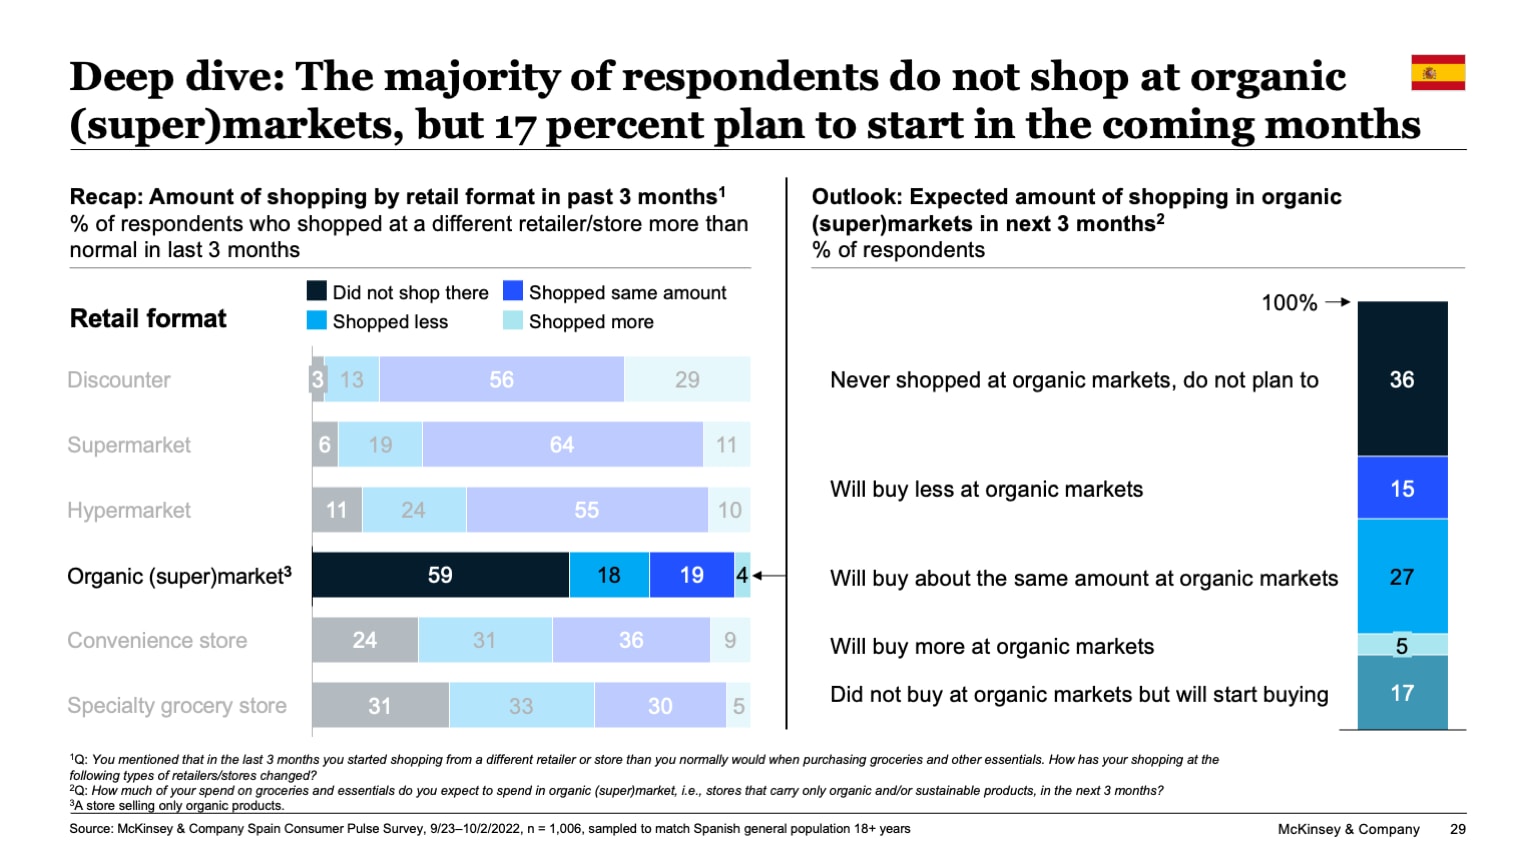 Deep dive: The majority of respondents do not shop at organic (super)markets, but 17 percent plan to start in the coming months